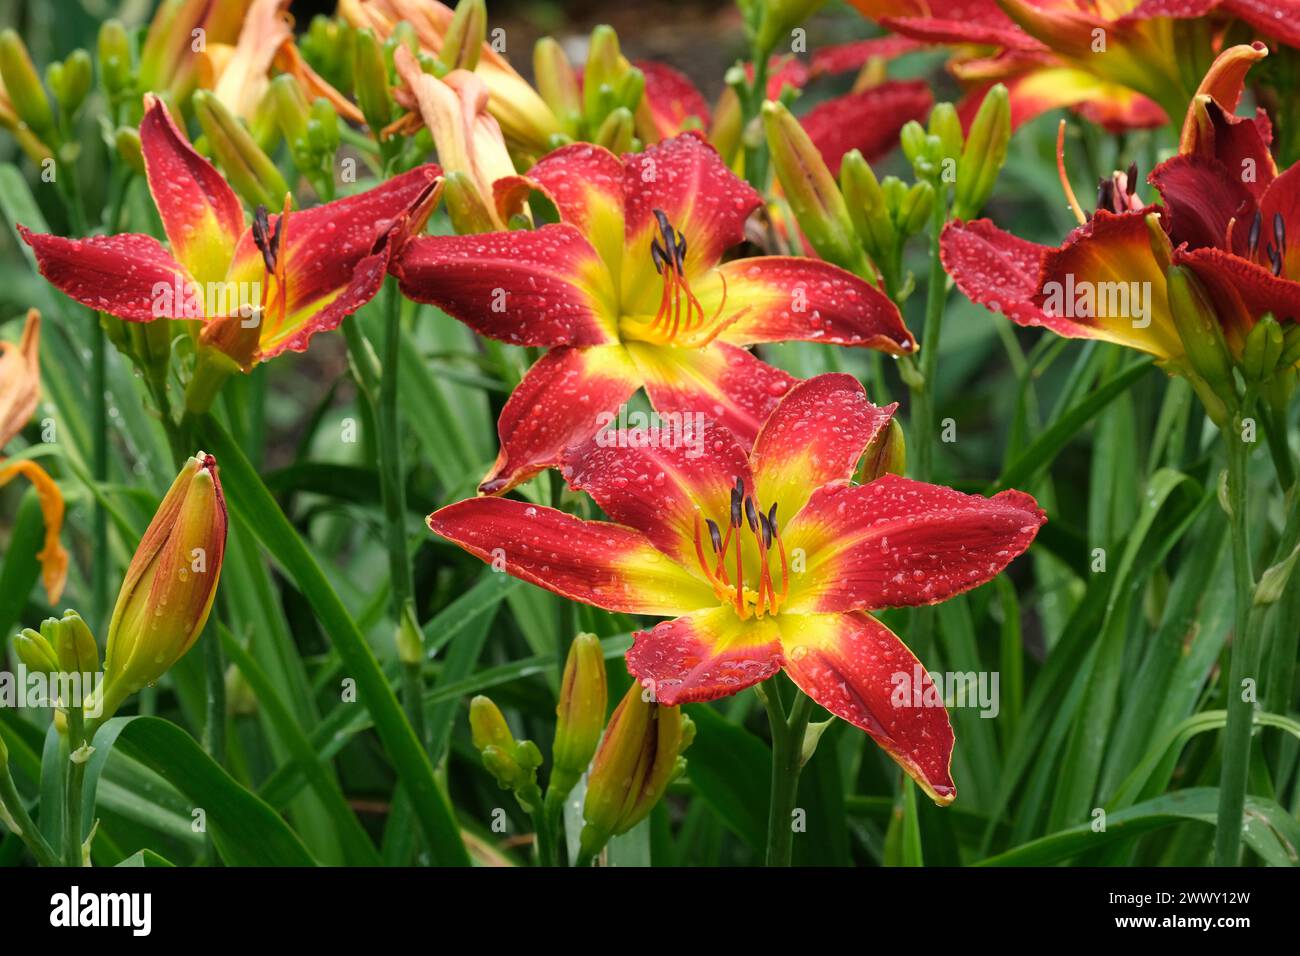 Hemerocallis All American Chief, Daylily All American Chief, grandes fleurs rouges avec une gorge jaune Banque D'Images